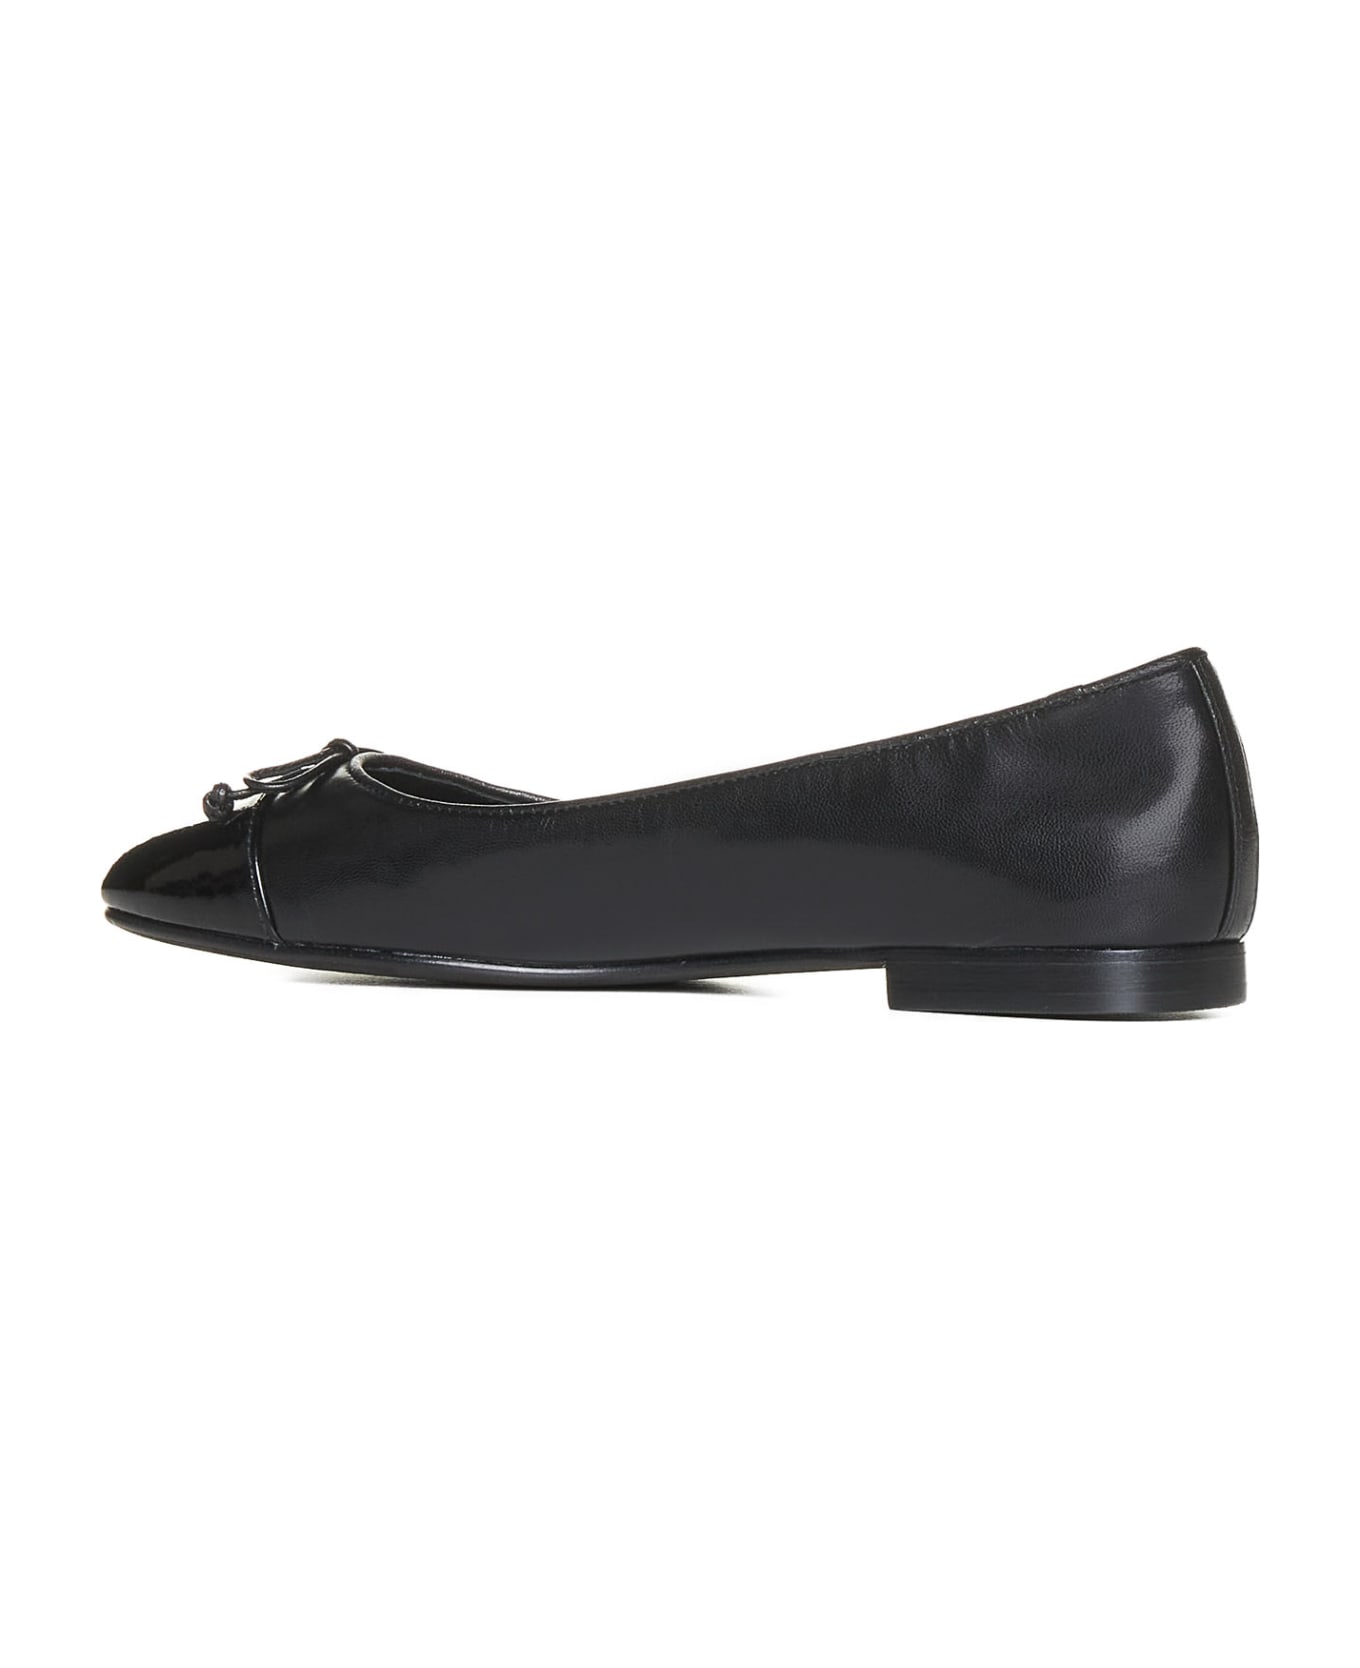 Tory Burch Bow Ballets - Perfect Black/perfect Black フラットシューズ